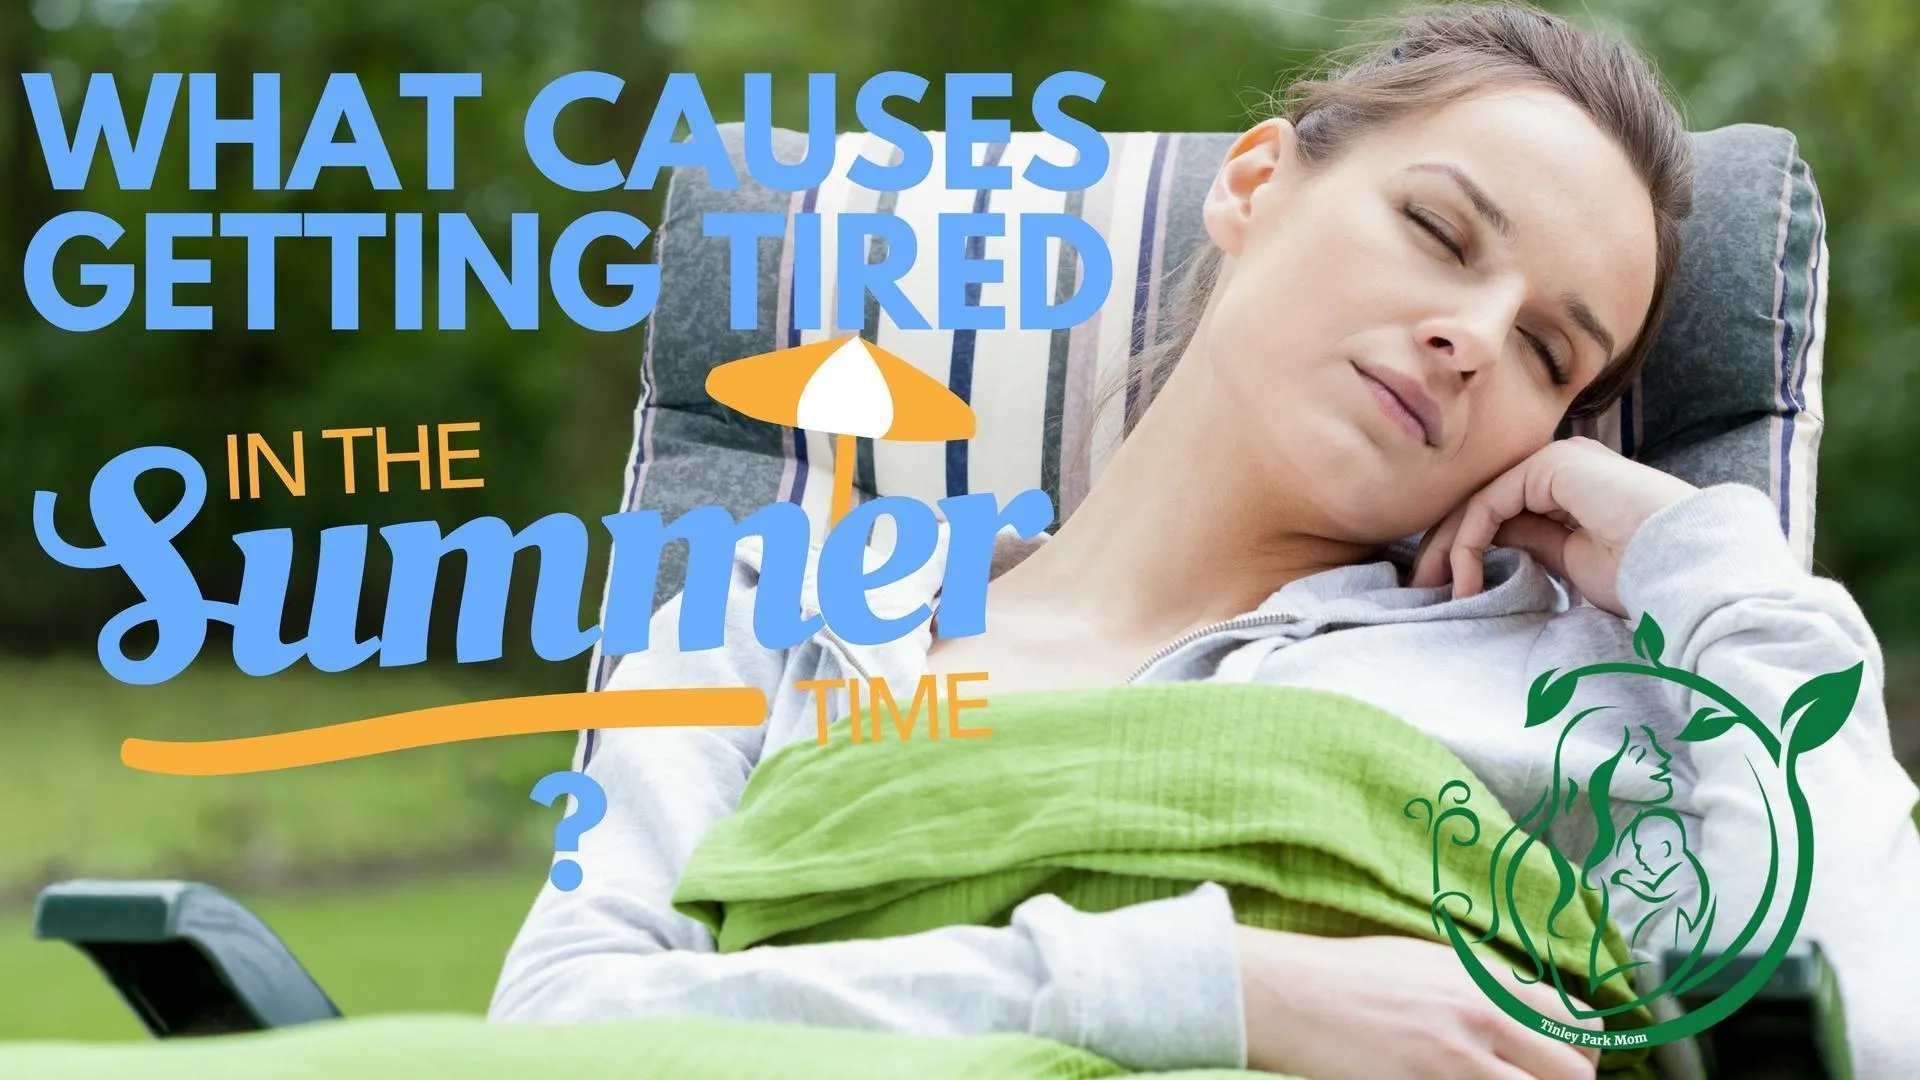 What Causes Getting Tired in the Summer?